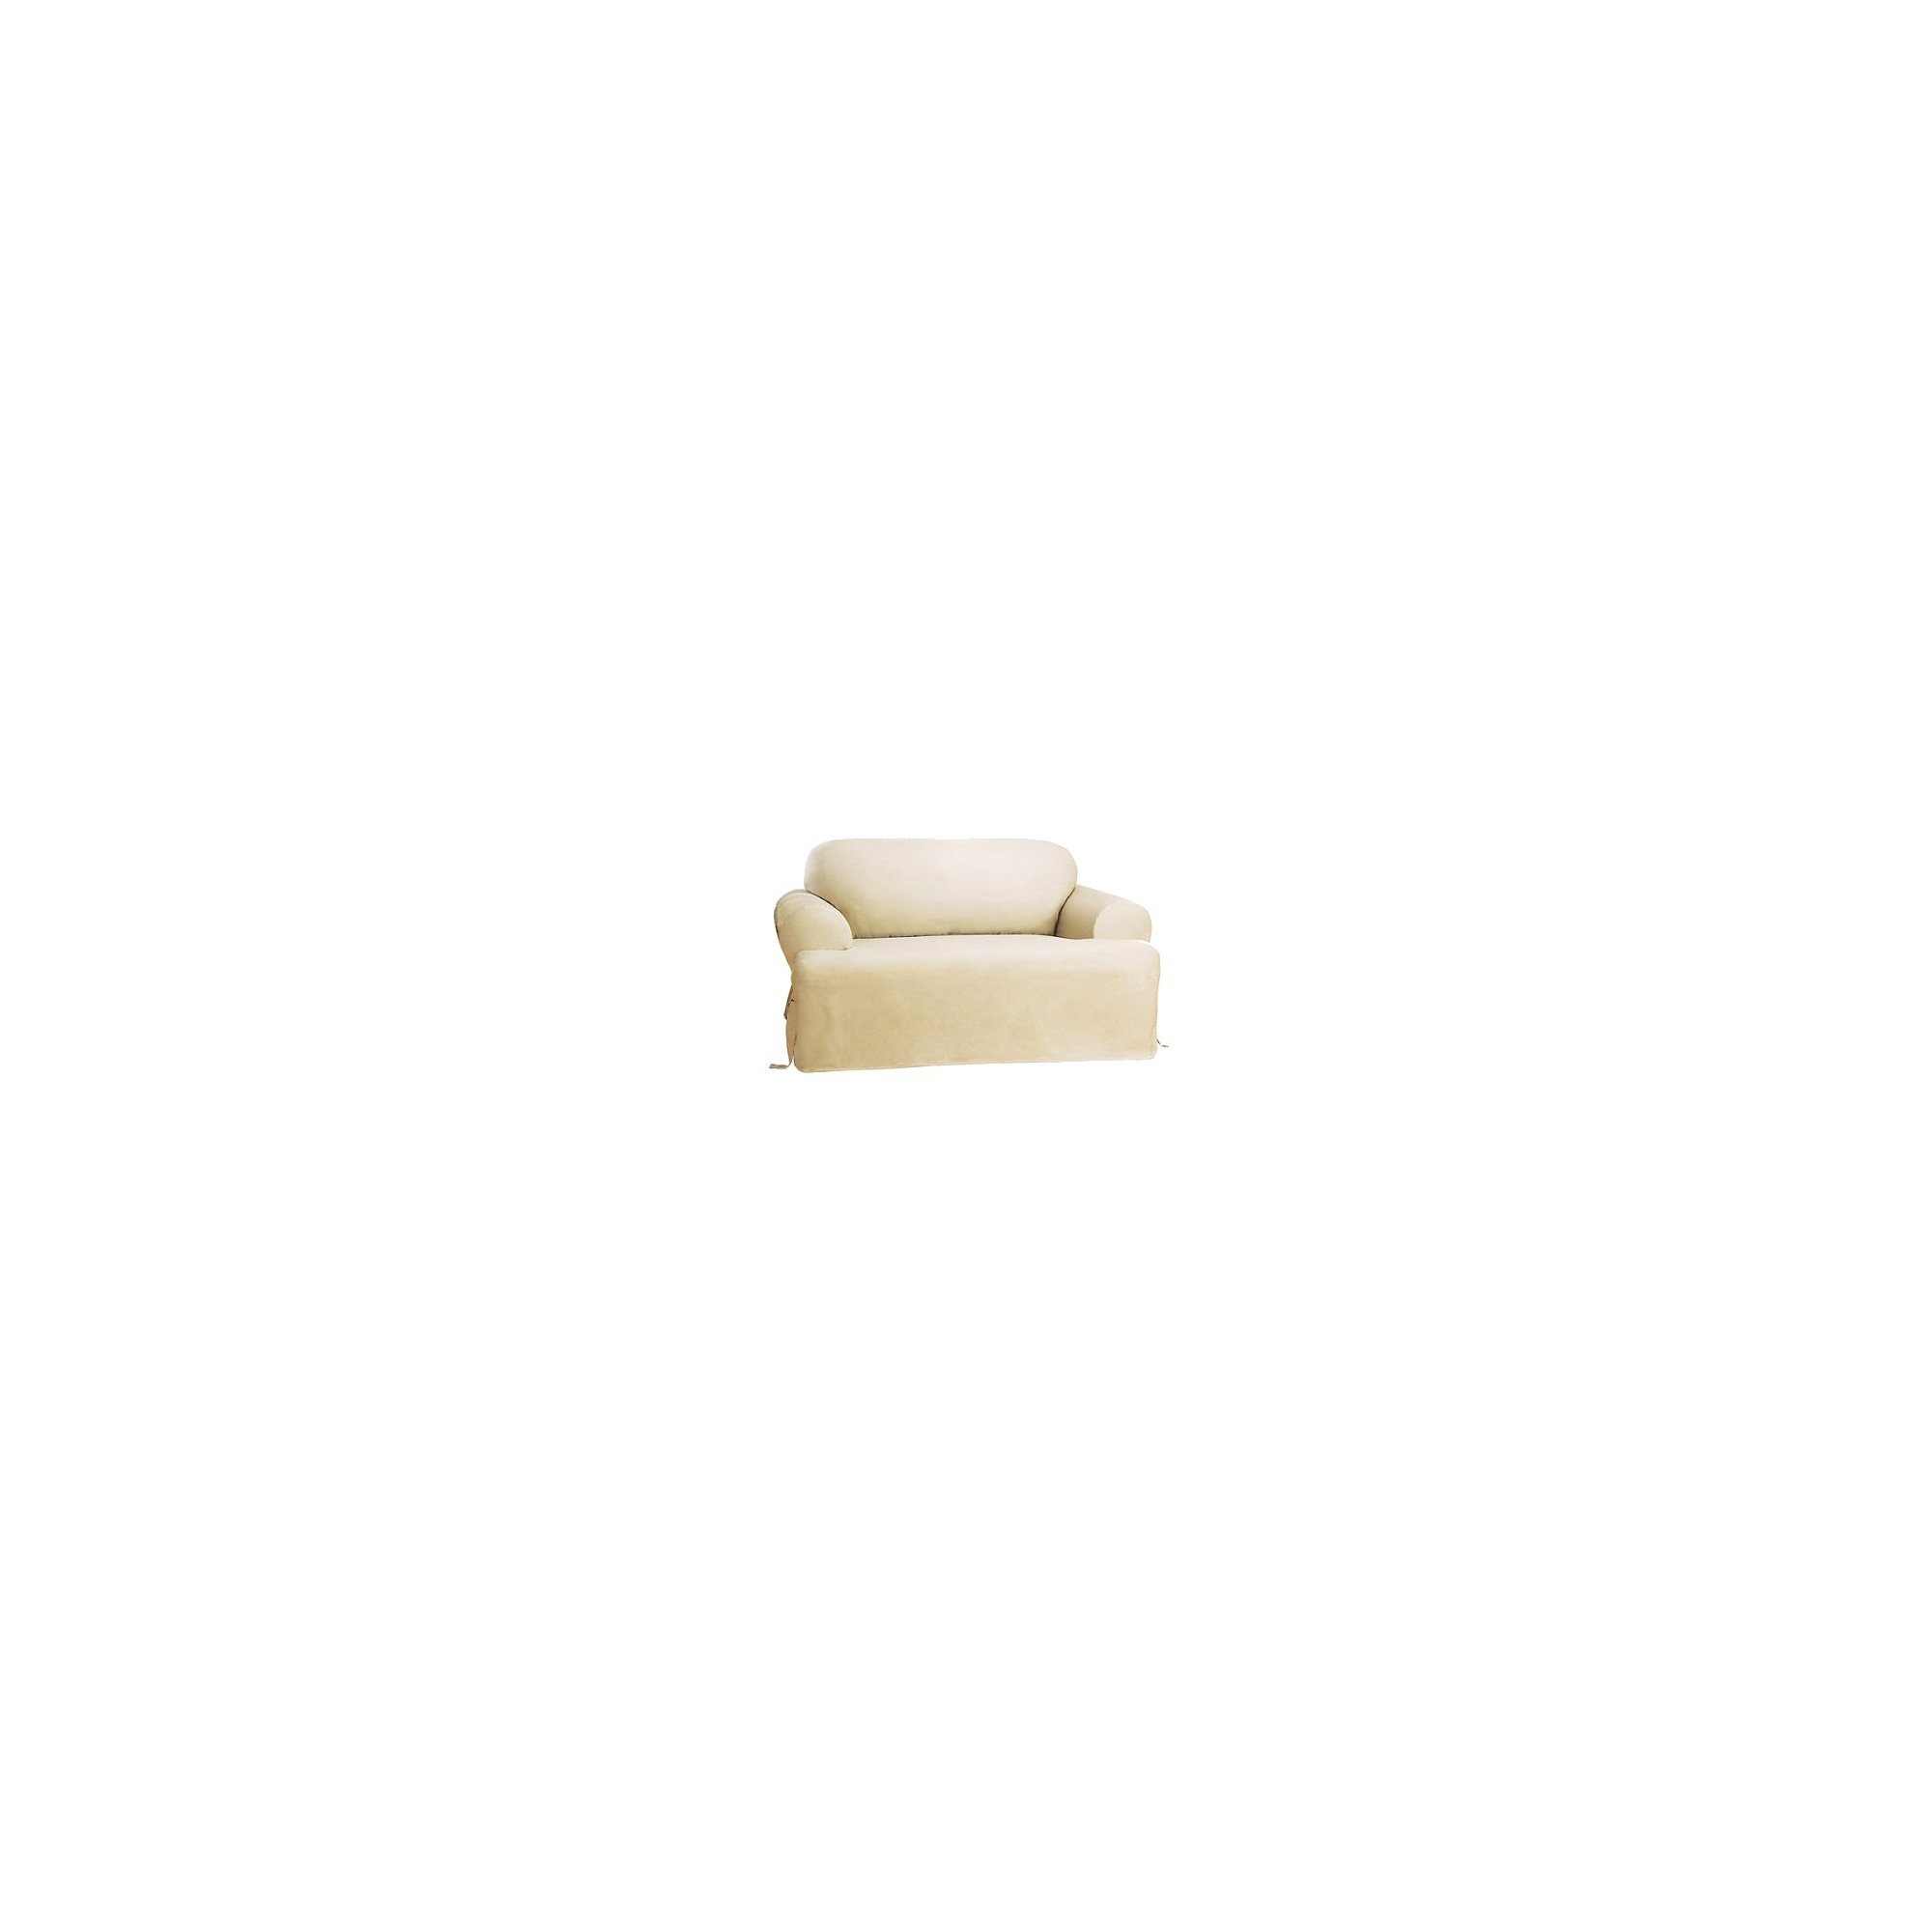 Cotton Duck Tcushion Loveseat Slipcover Natural - Sure Fit